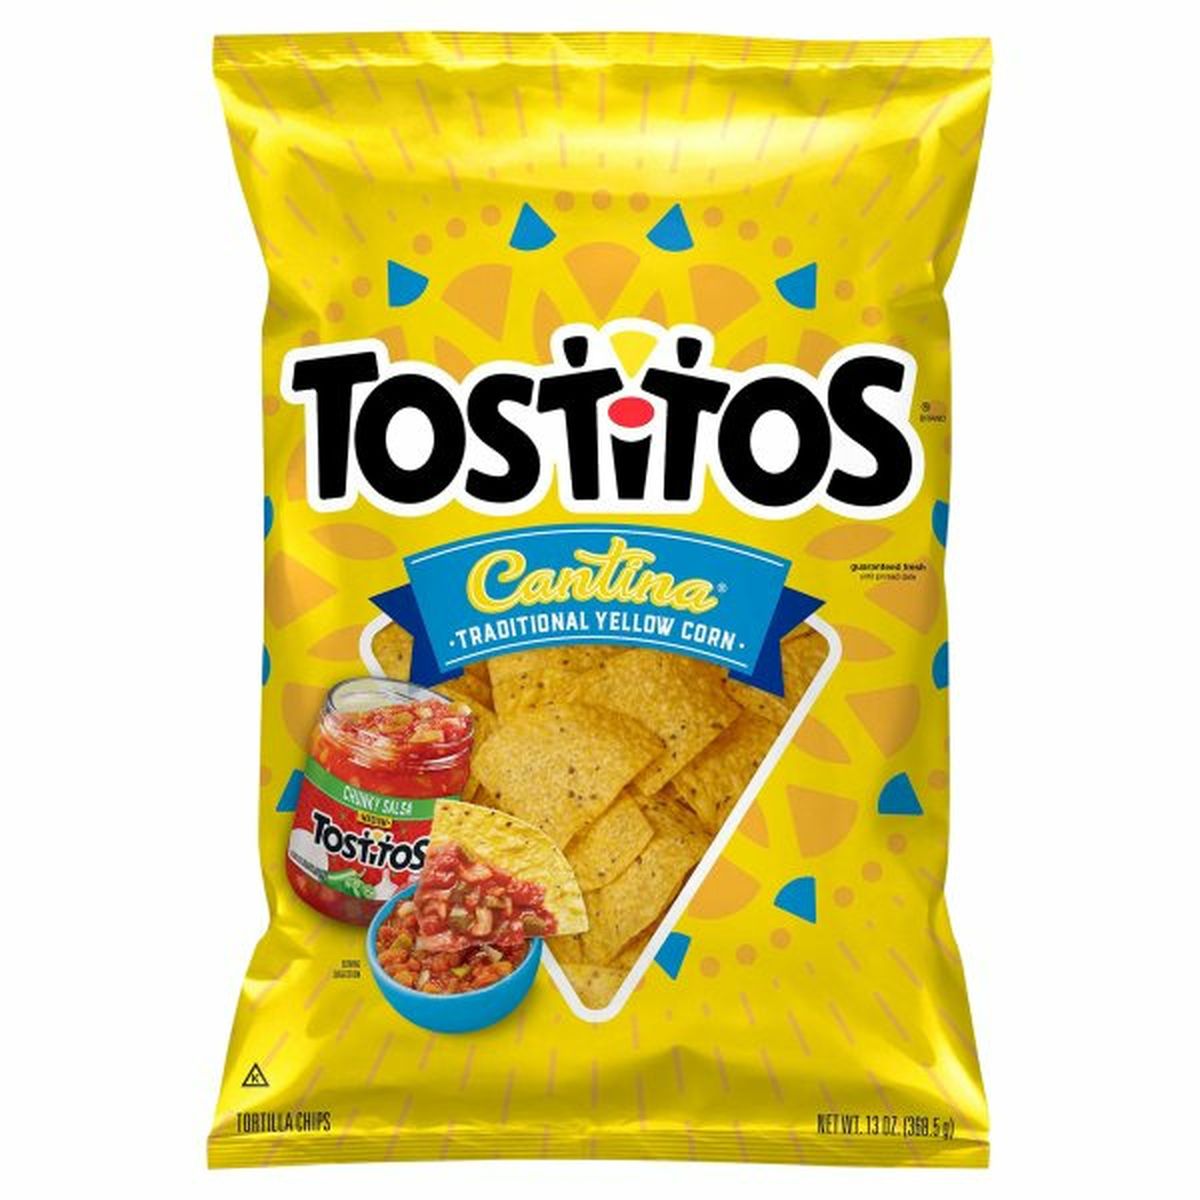 Calories in Tostitos Tortilla Chips, Cantina, Traditional Yellow Corn